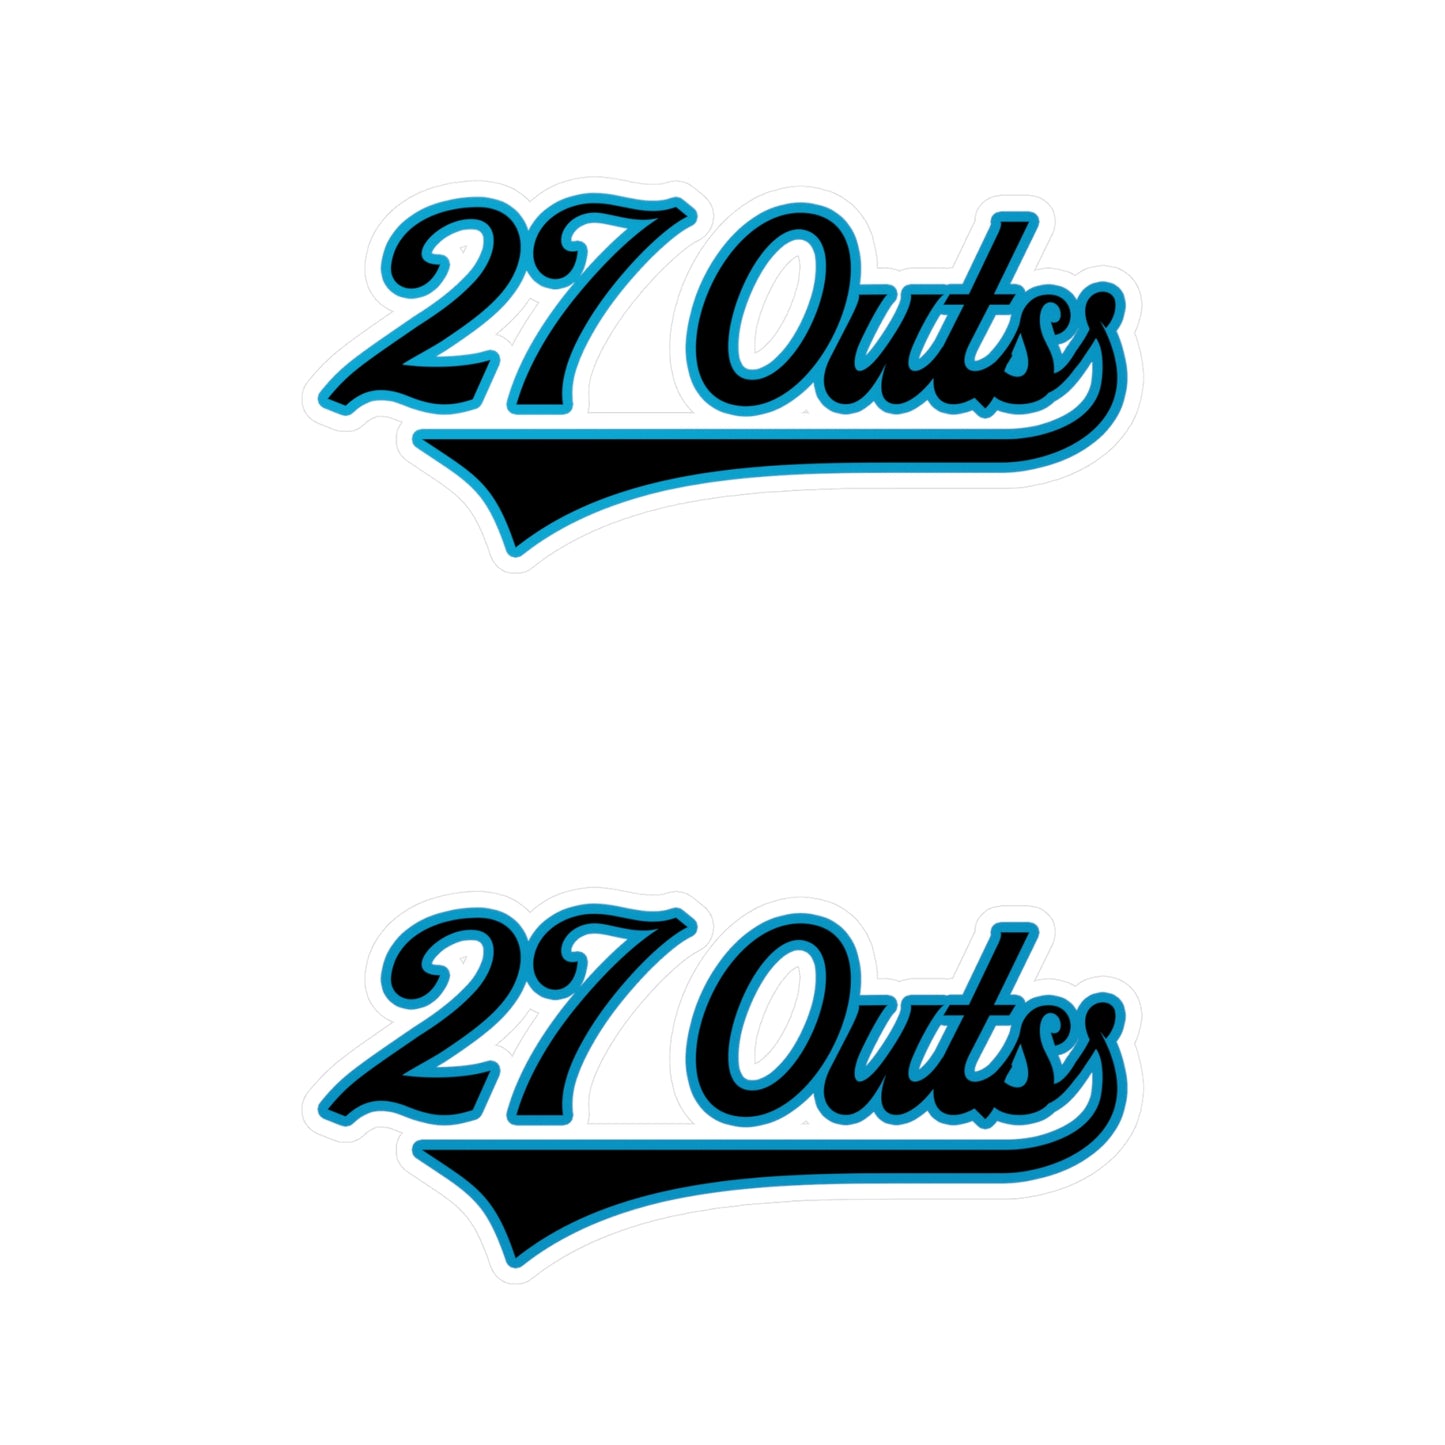 Two 27 Outs Cut Vinyl Decals